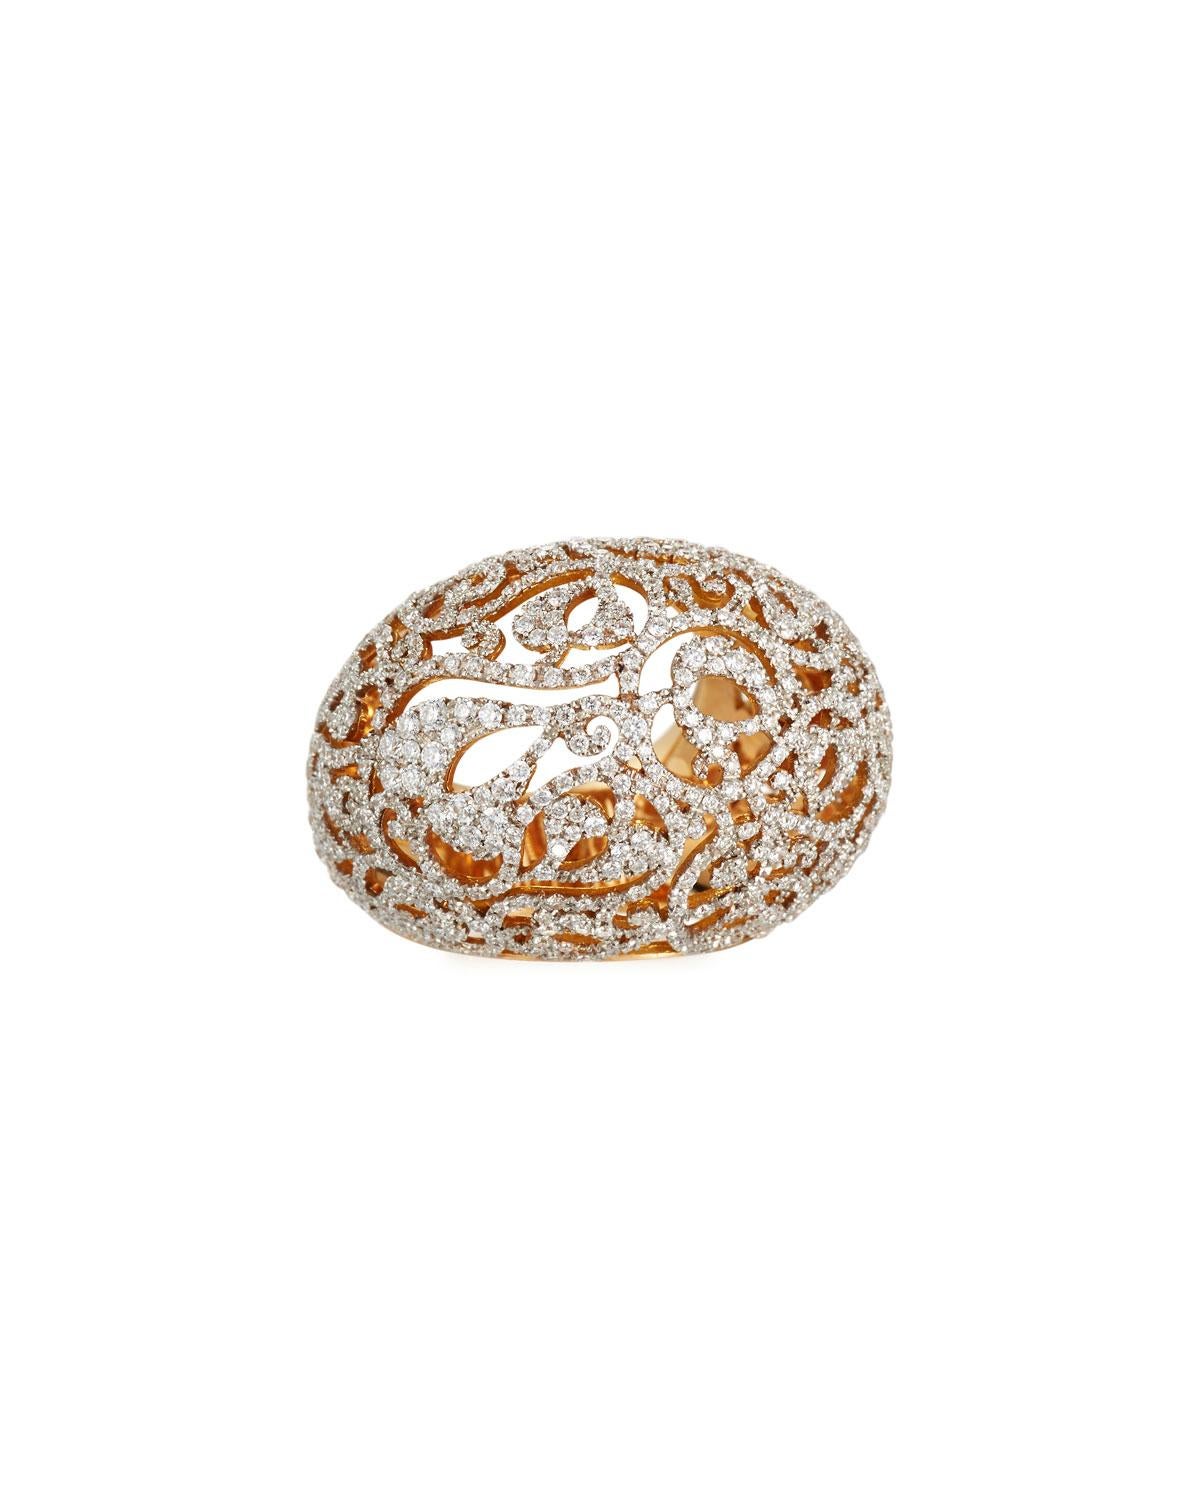 An impressive, one-of-a-kind ring featuring rounded volumes and glistening diamonds mounted on openwork with a see-through effect.

The latest additions to Pomellato's Arabesque collection surprise with their bold yet featherlight proportions.